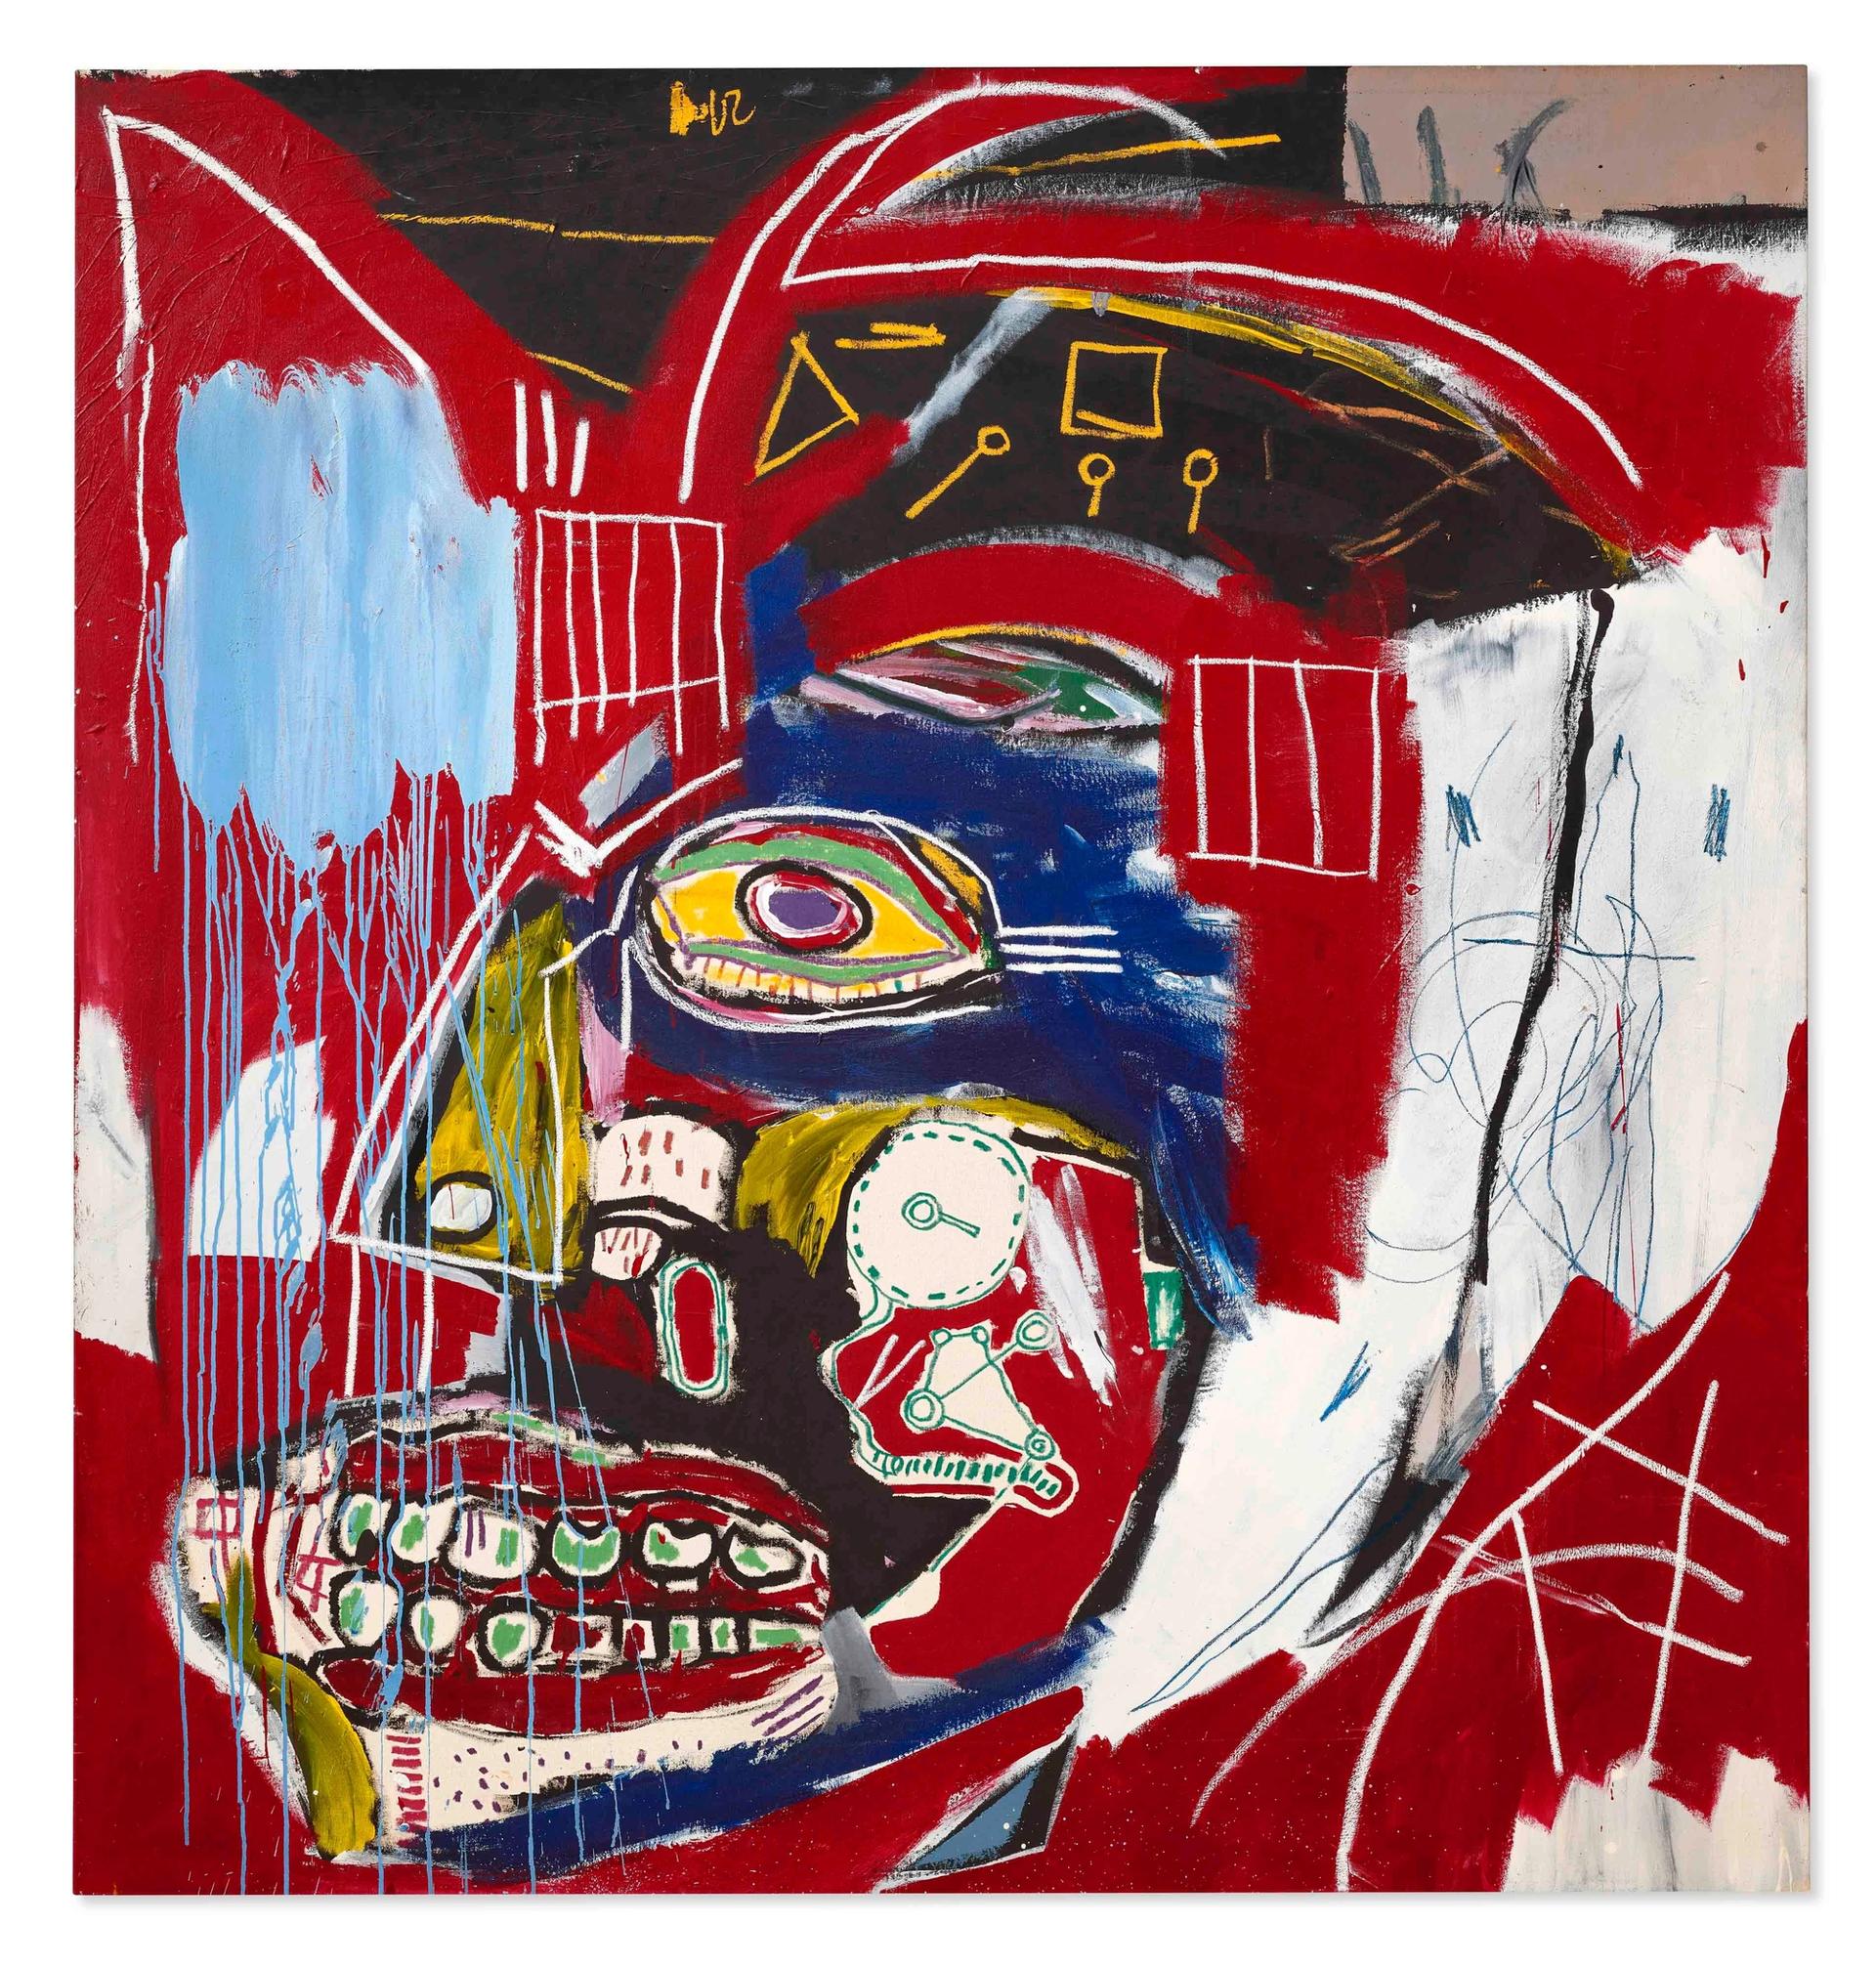 Jean-Michel Basquiat's In This Case sold for $93.1m Courtesy of Christie's